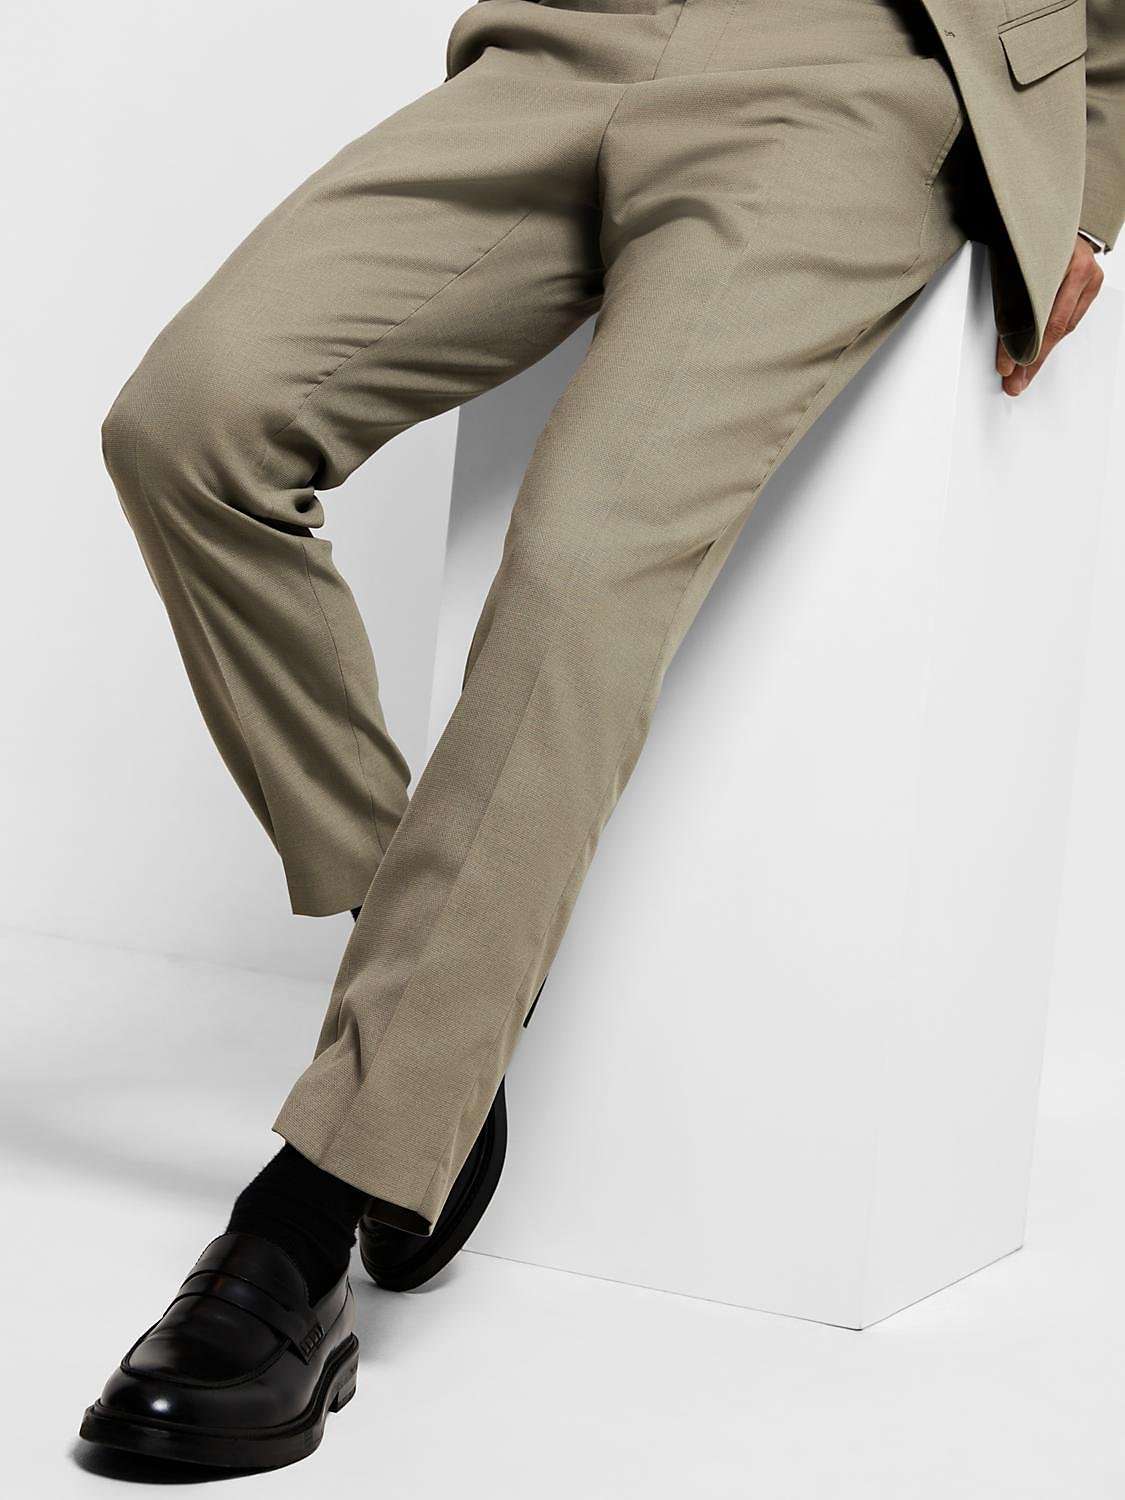 Buy SELECTED HOMME Neil Slim Fit Trousers, Vetiver Online at johnlewis.com